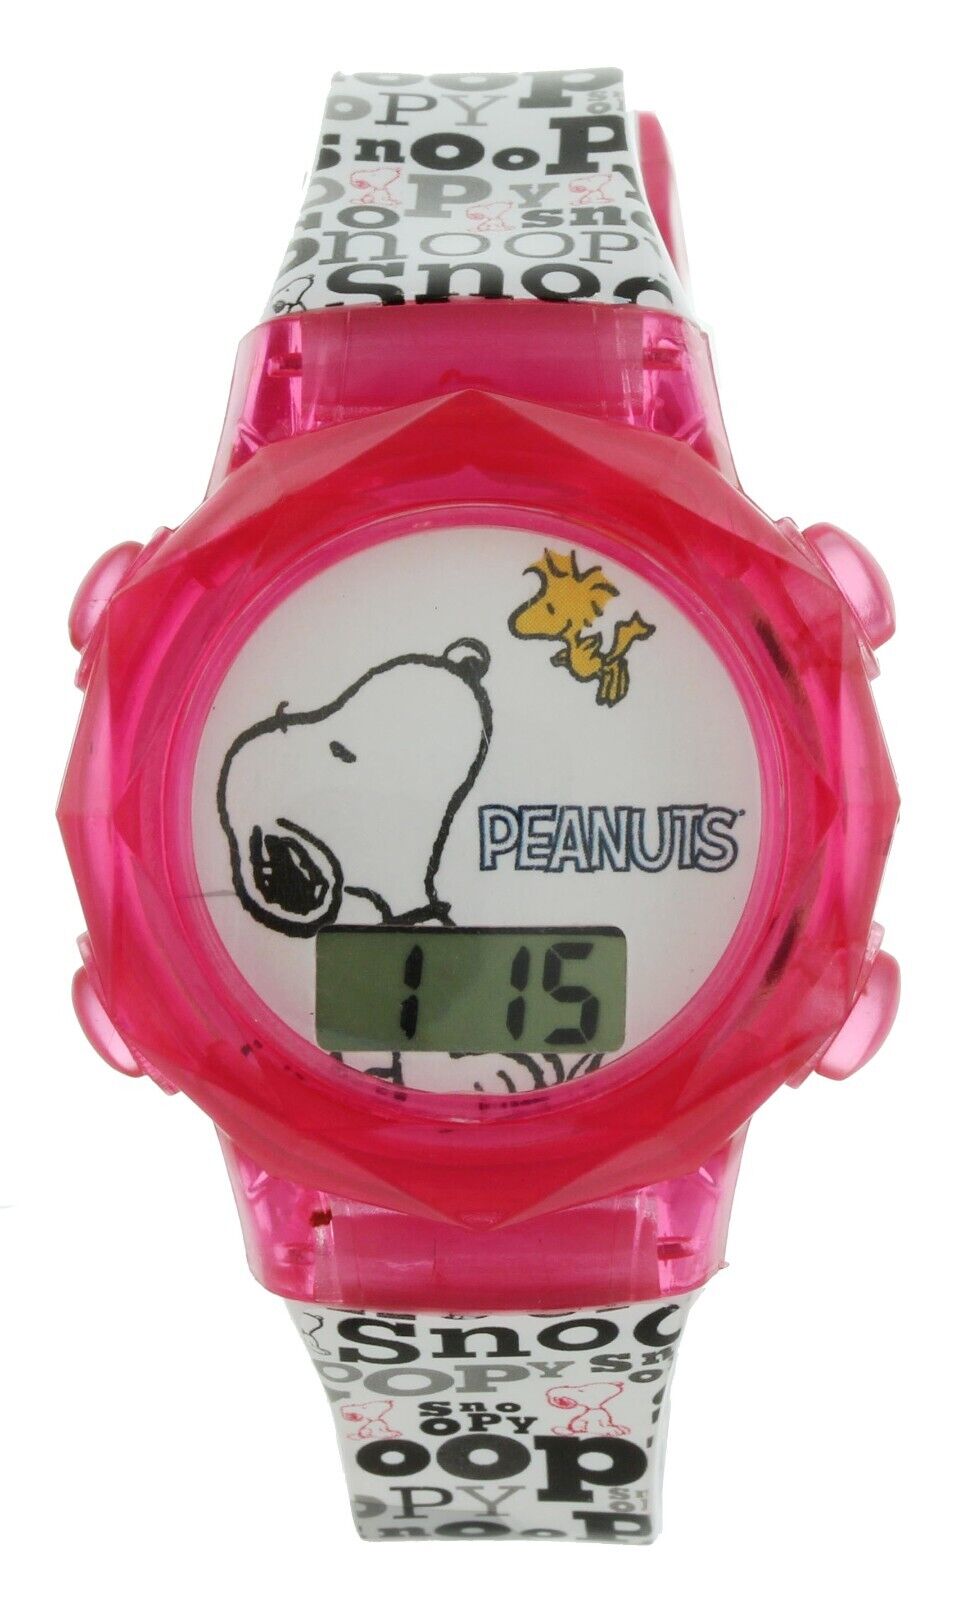 Vintage Peanuts Snoopy printed band LCD collectable watch